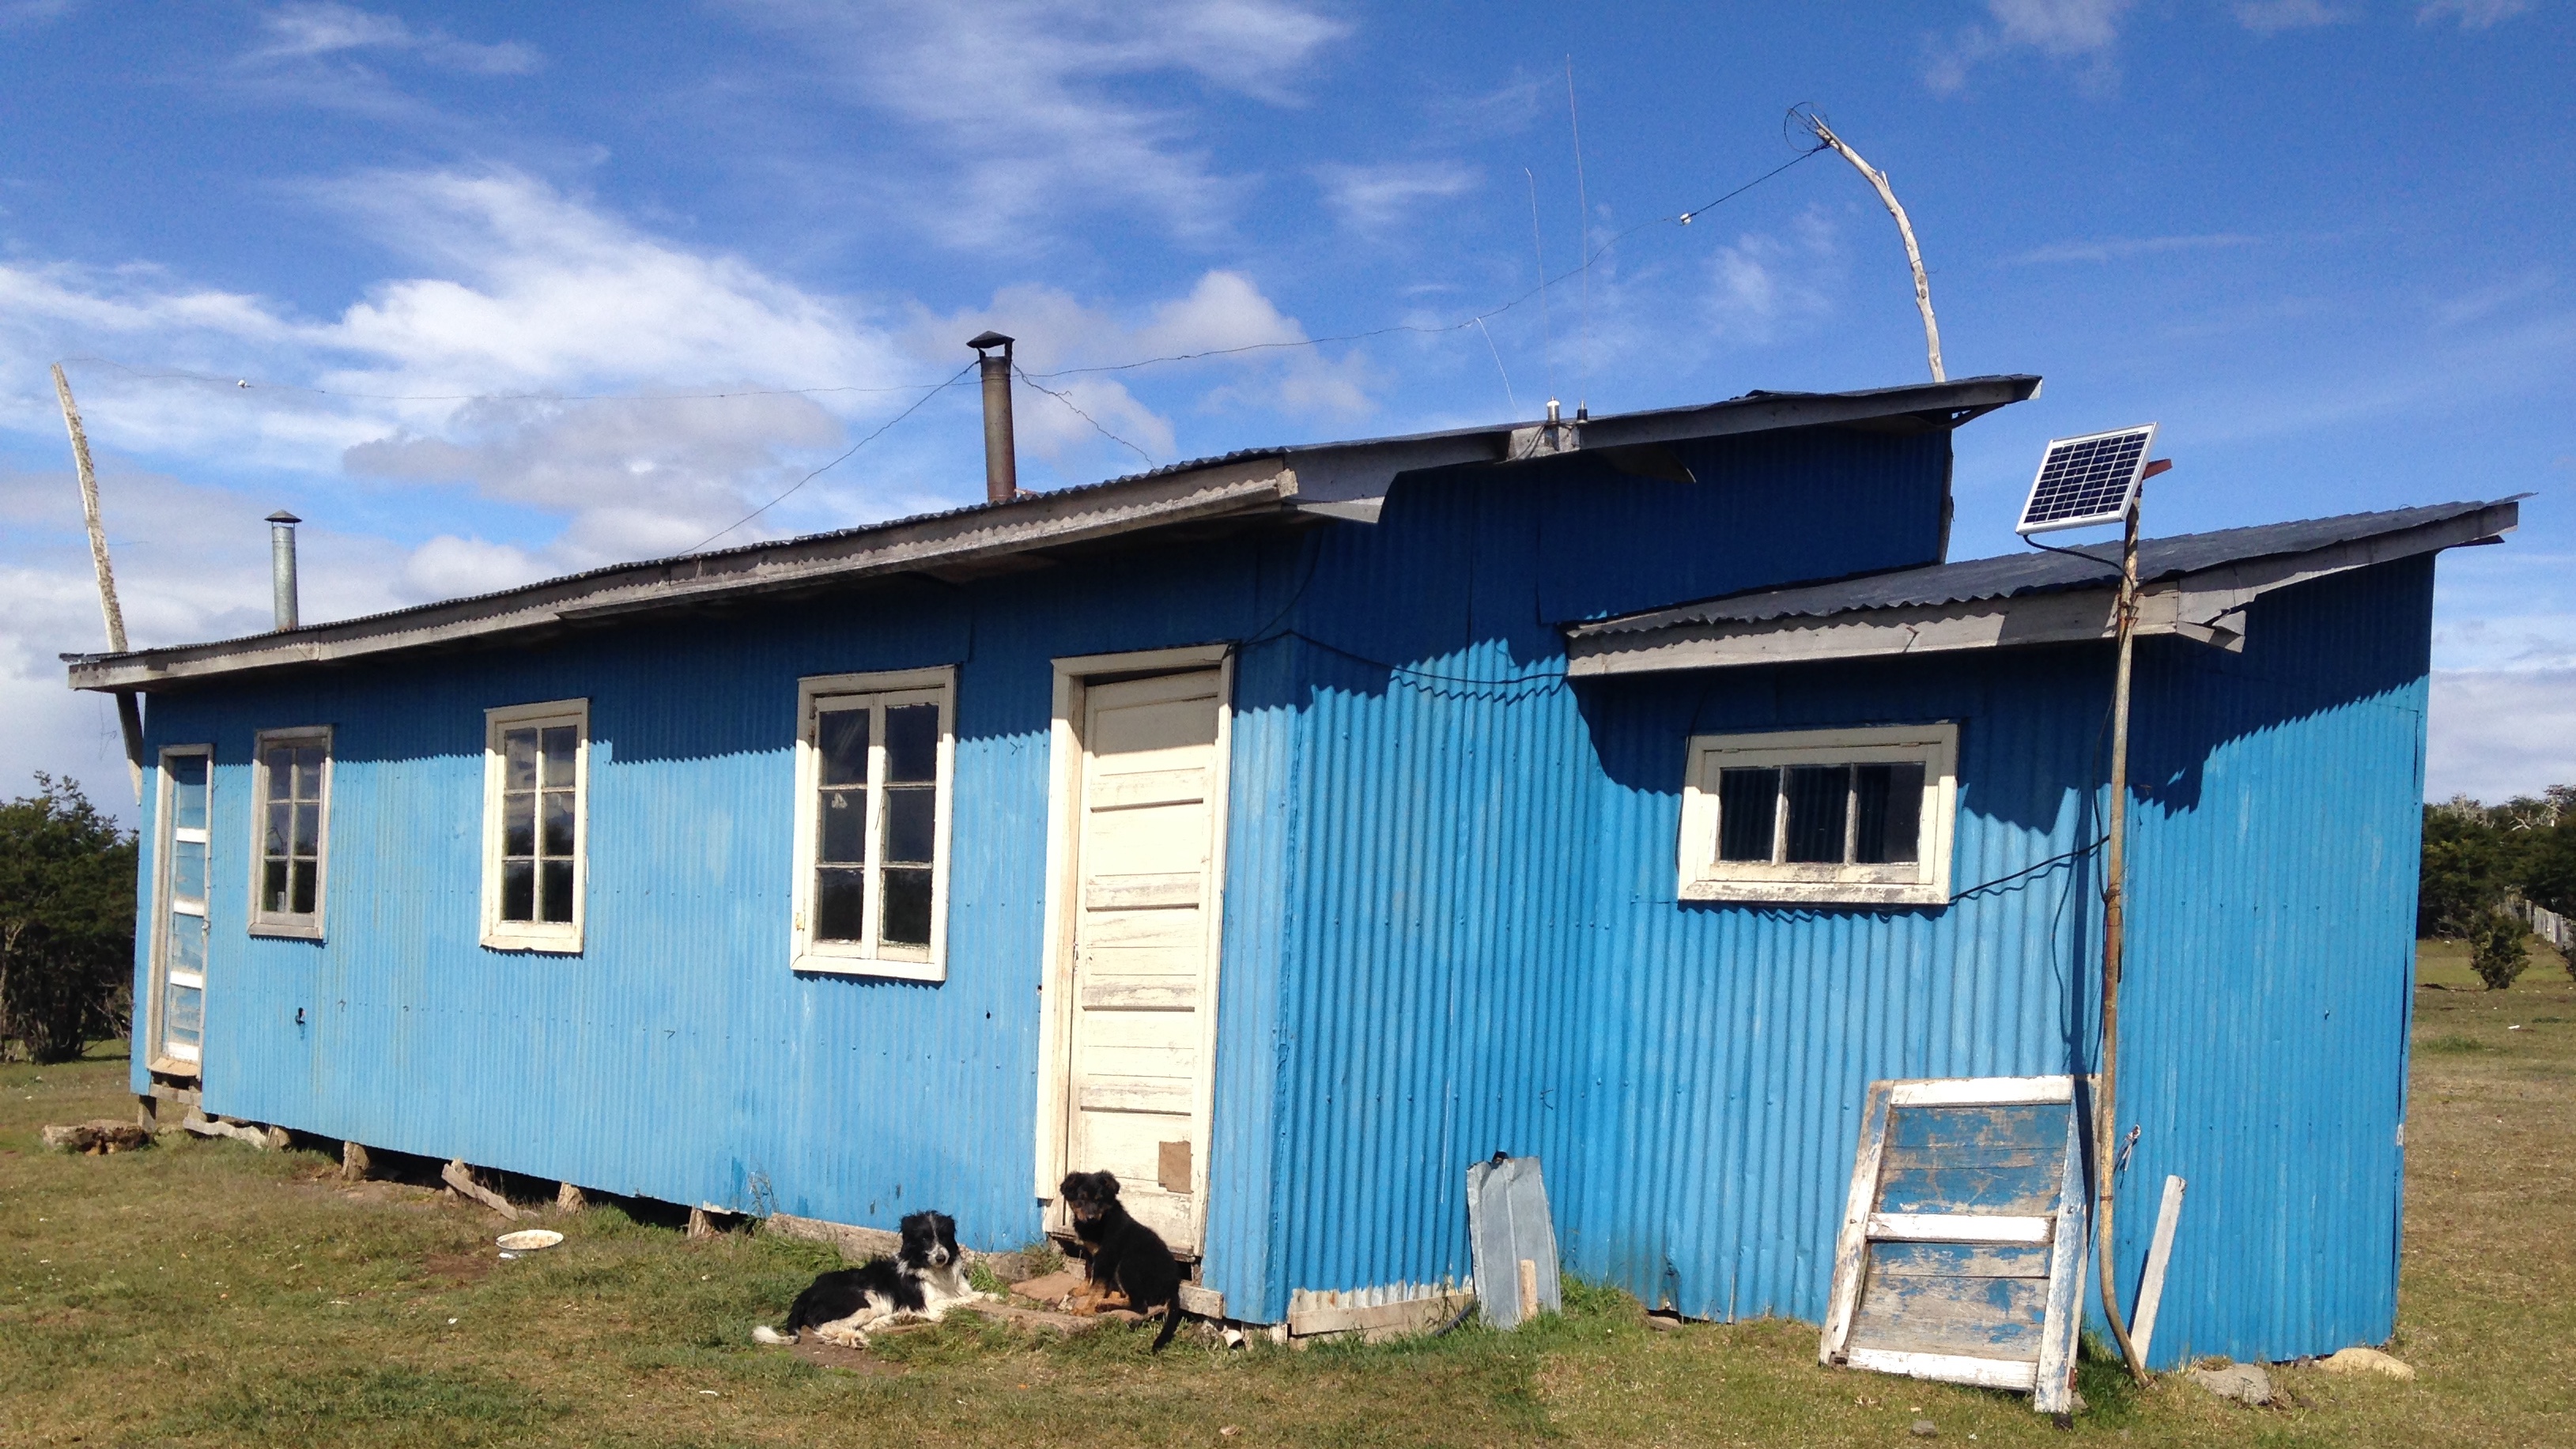 dogs sit outside a blue house on a ranch in Chile